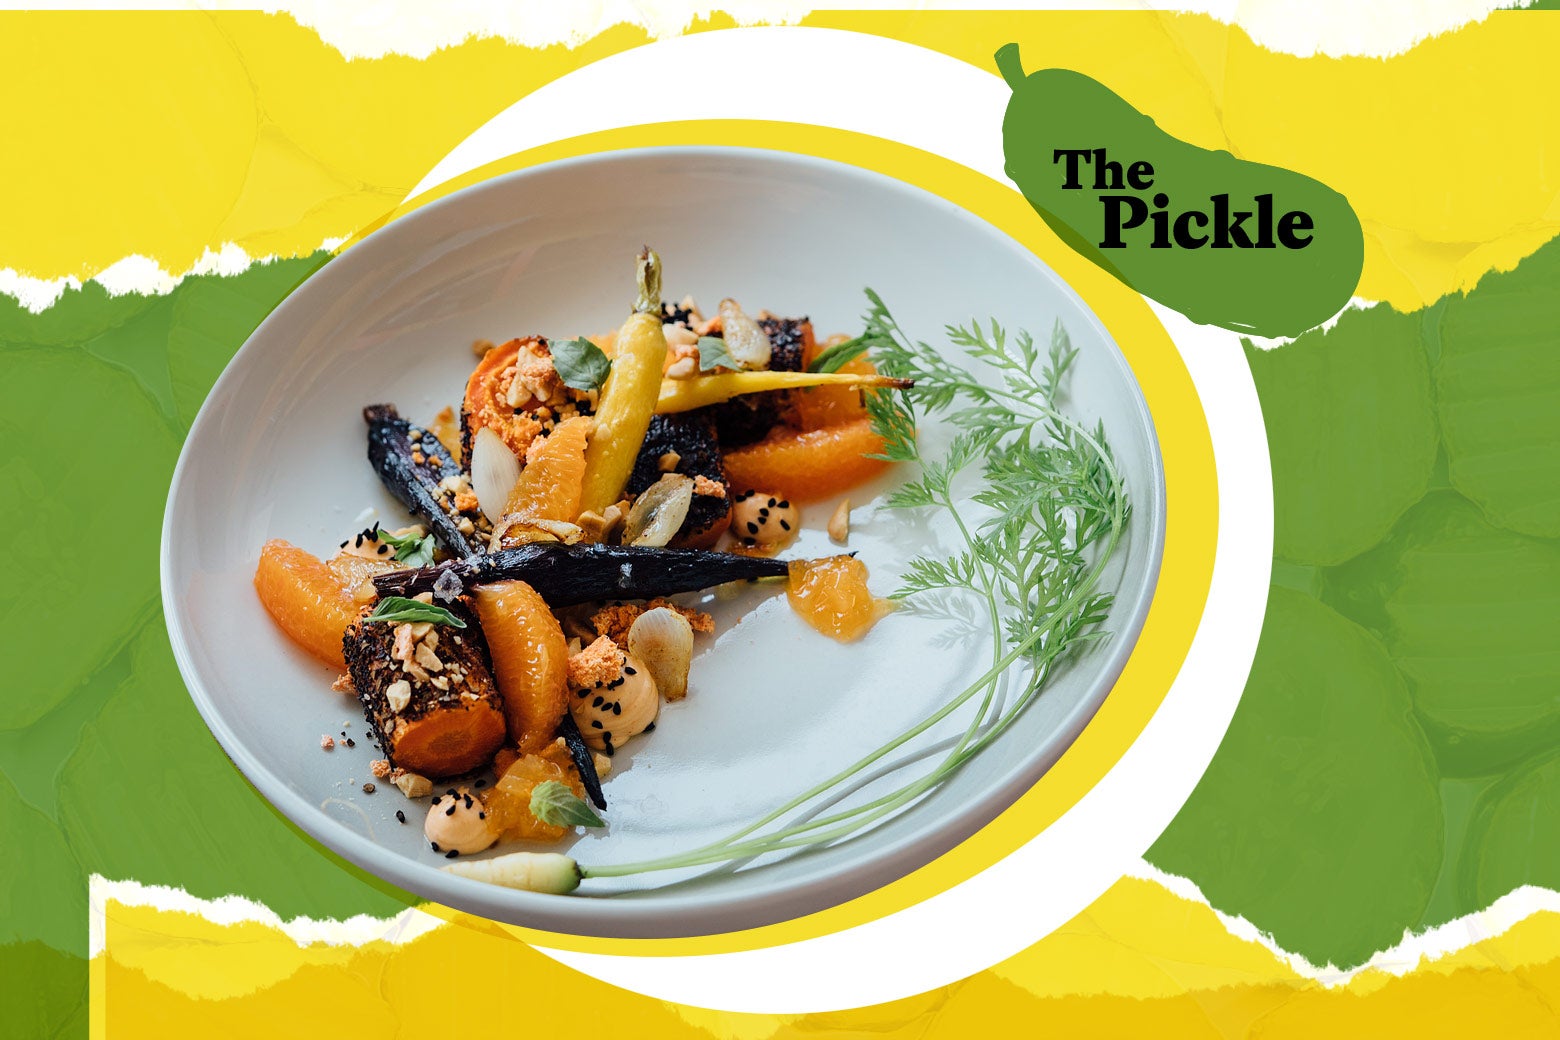 Fancy vegetable dish with Pickle logo.